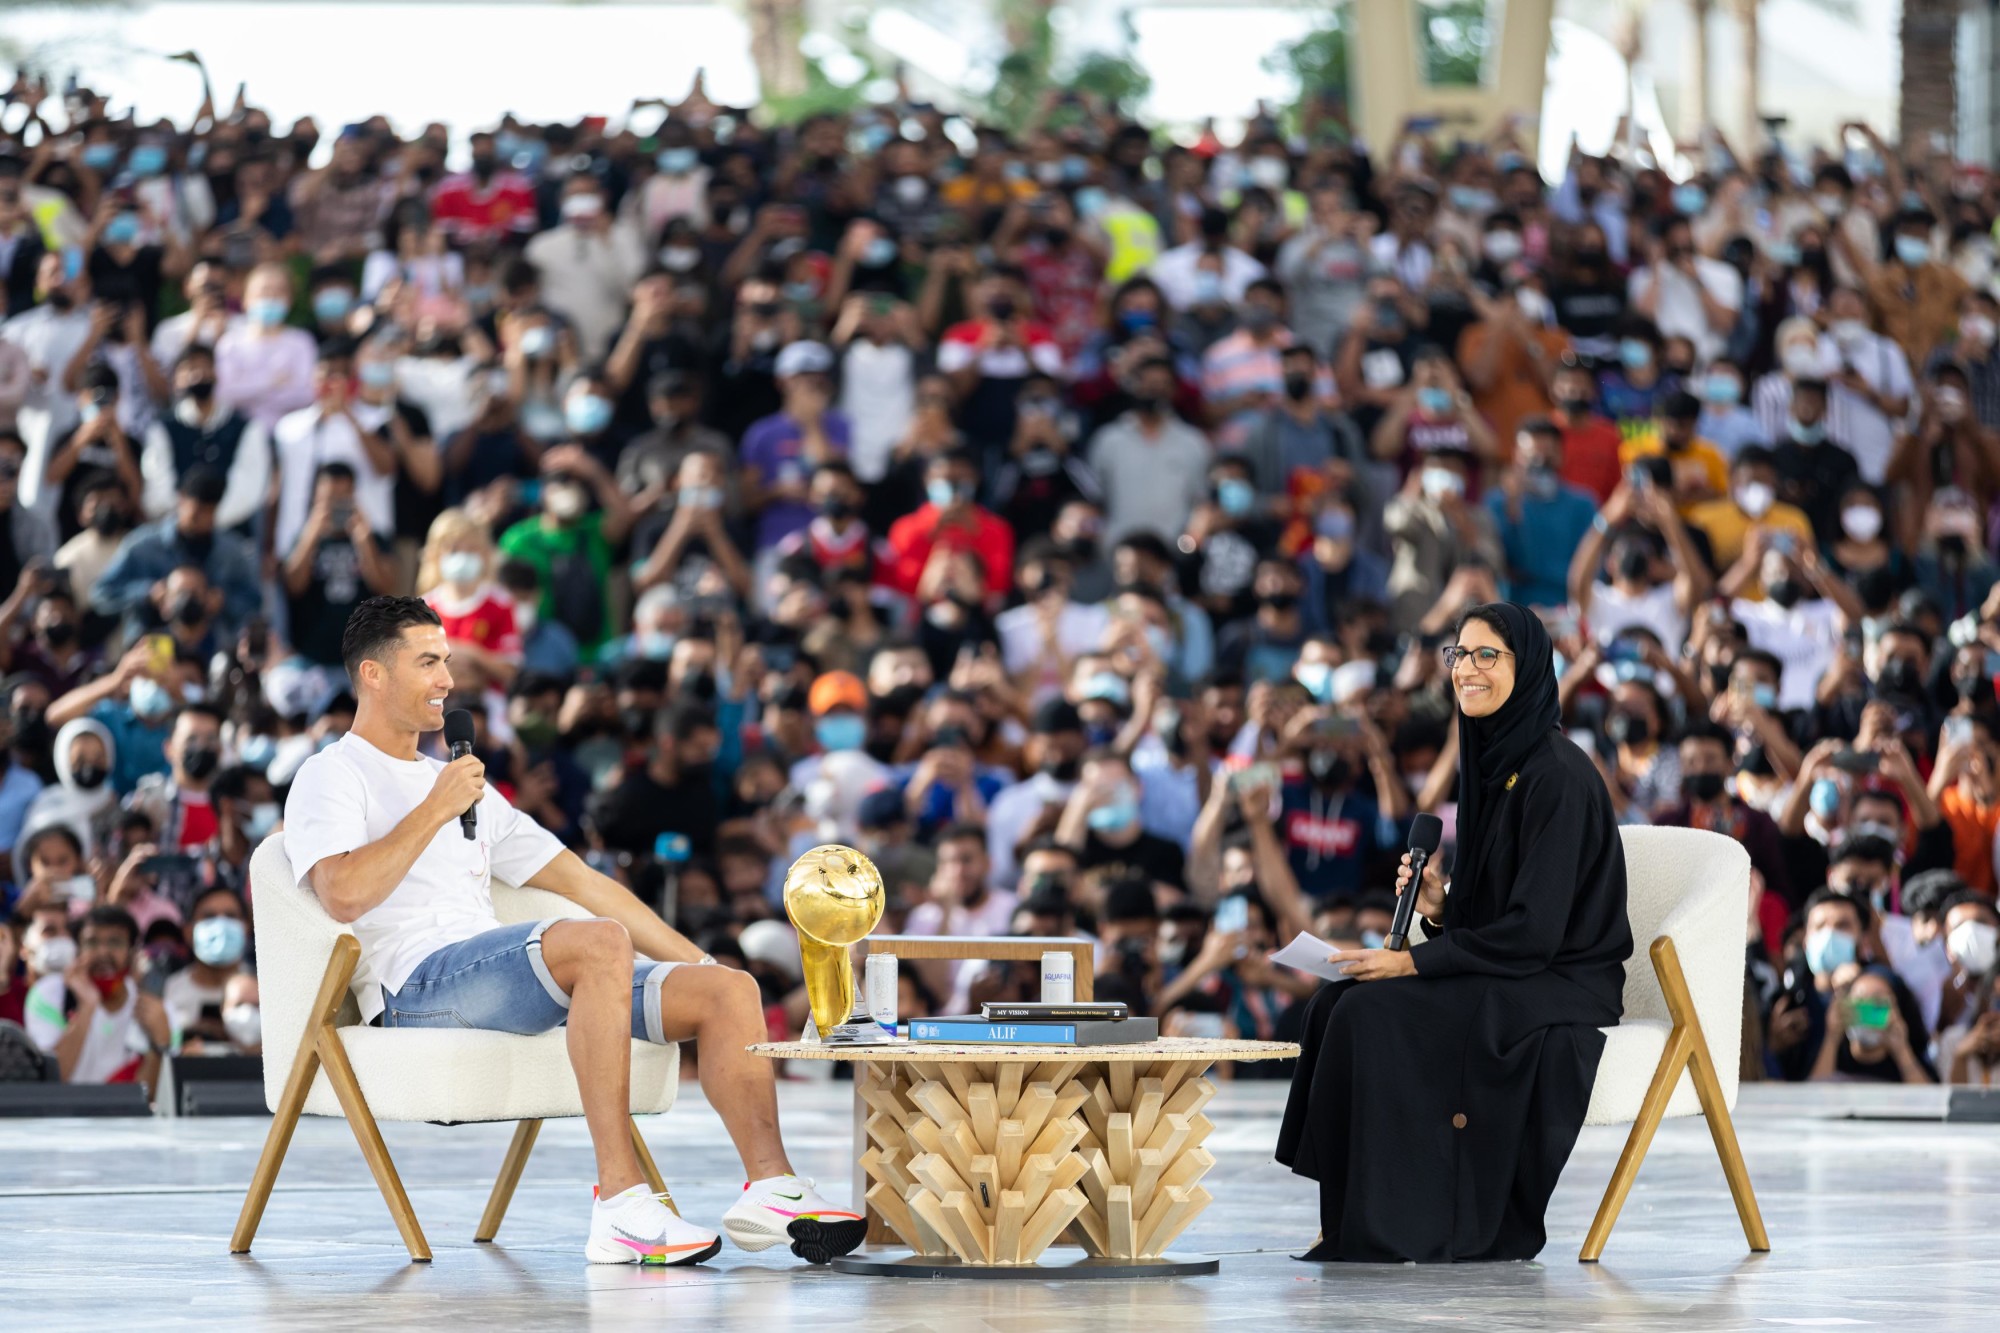 Cristiano Ronaldo (L), Portugal international and Manchester United forward footballer and Marjan Faraidooni, Chief Experience Officer, Expo 2020 at Al Wasl m39456